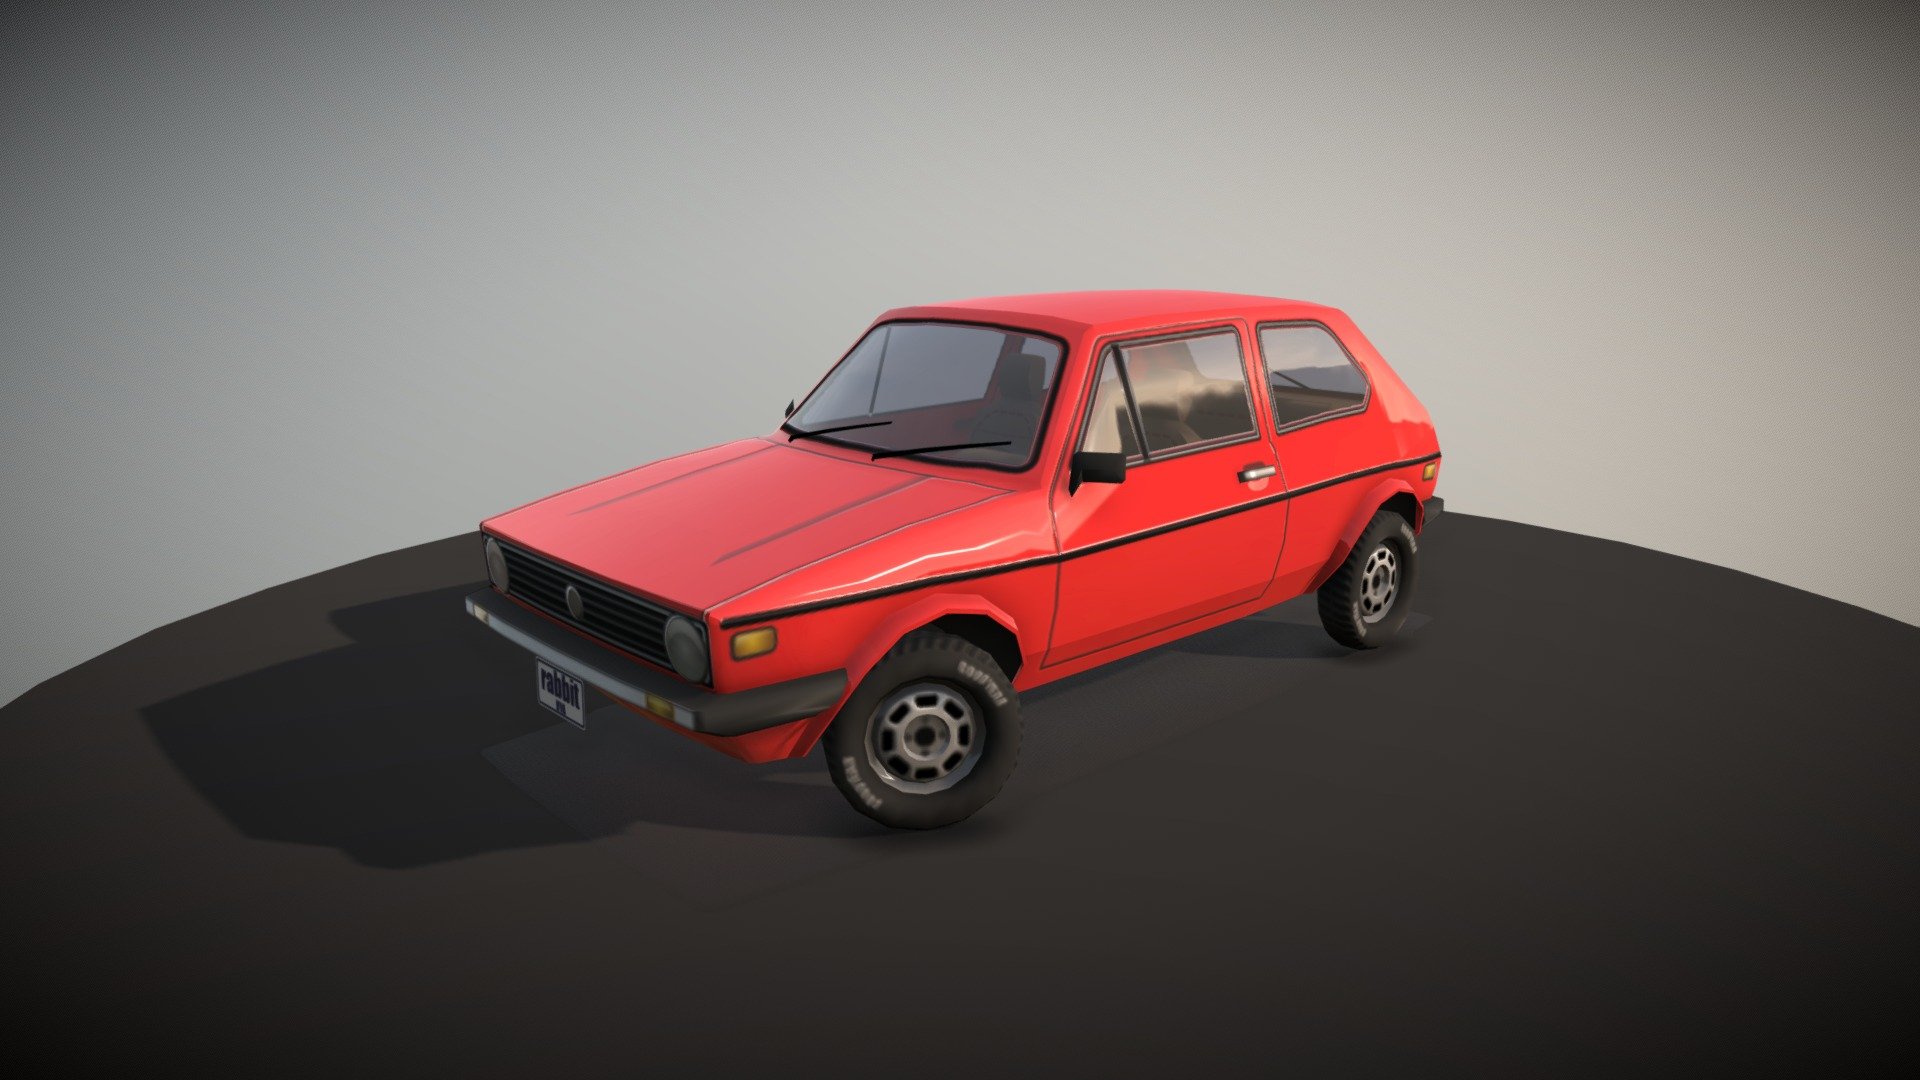 This is a lowpoly Volkwagen Golf Mark 1, also known as Rabbit in the US, dated from 1974. Volkswagen produced it as a replacement for it's famous Beetle, since more modern cars were produced at the time by other companies.
The model is around 1,900 polygons, totally unwrapped uvs, textures made on illustrator. Modelled in Blender 3D 3d model